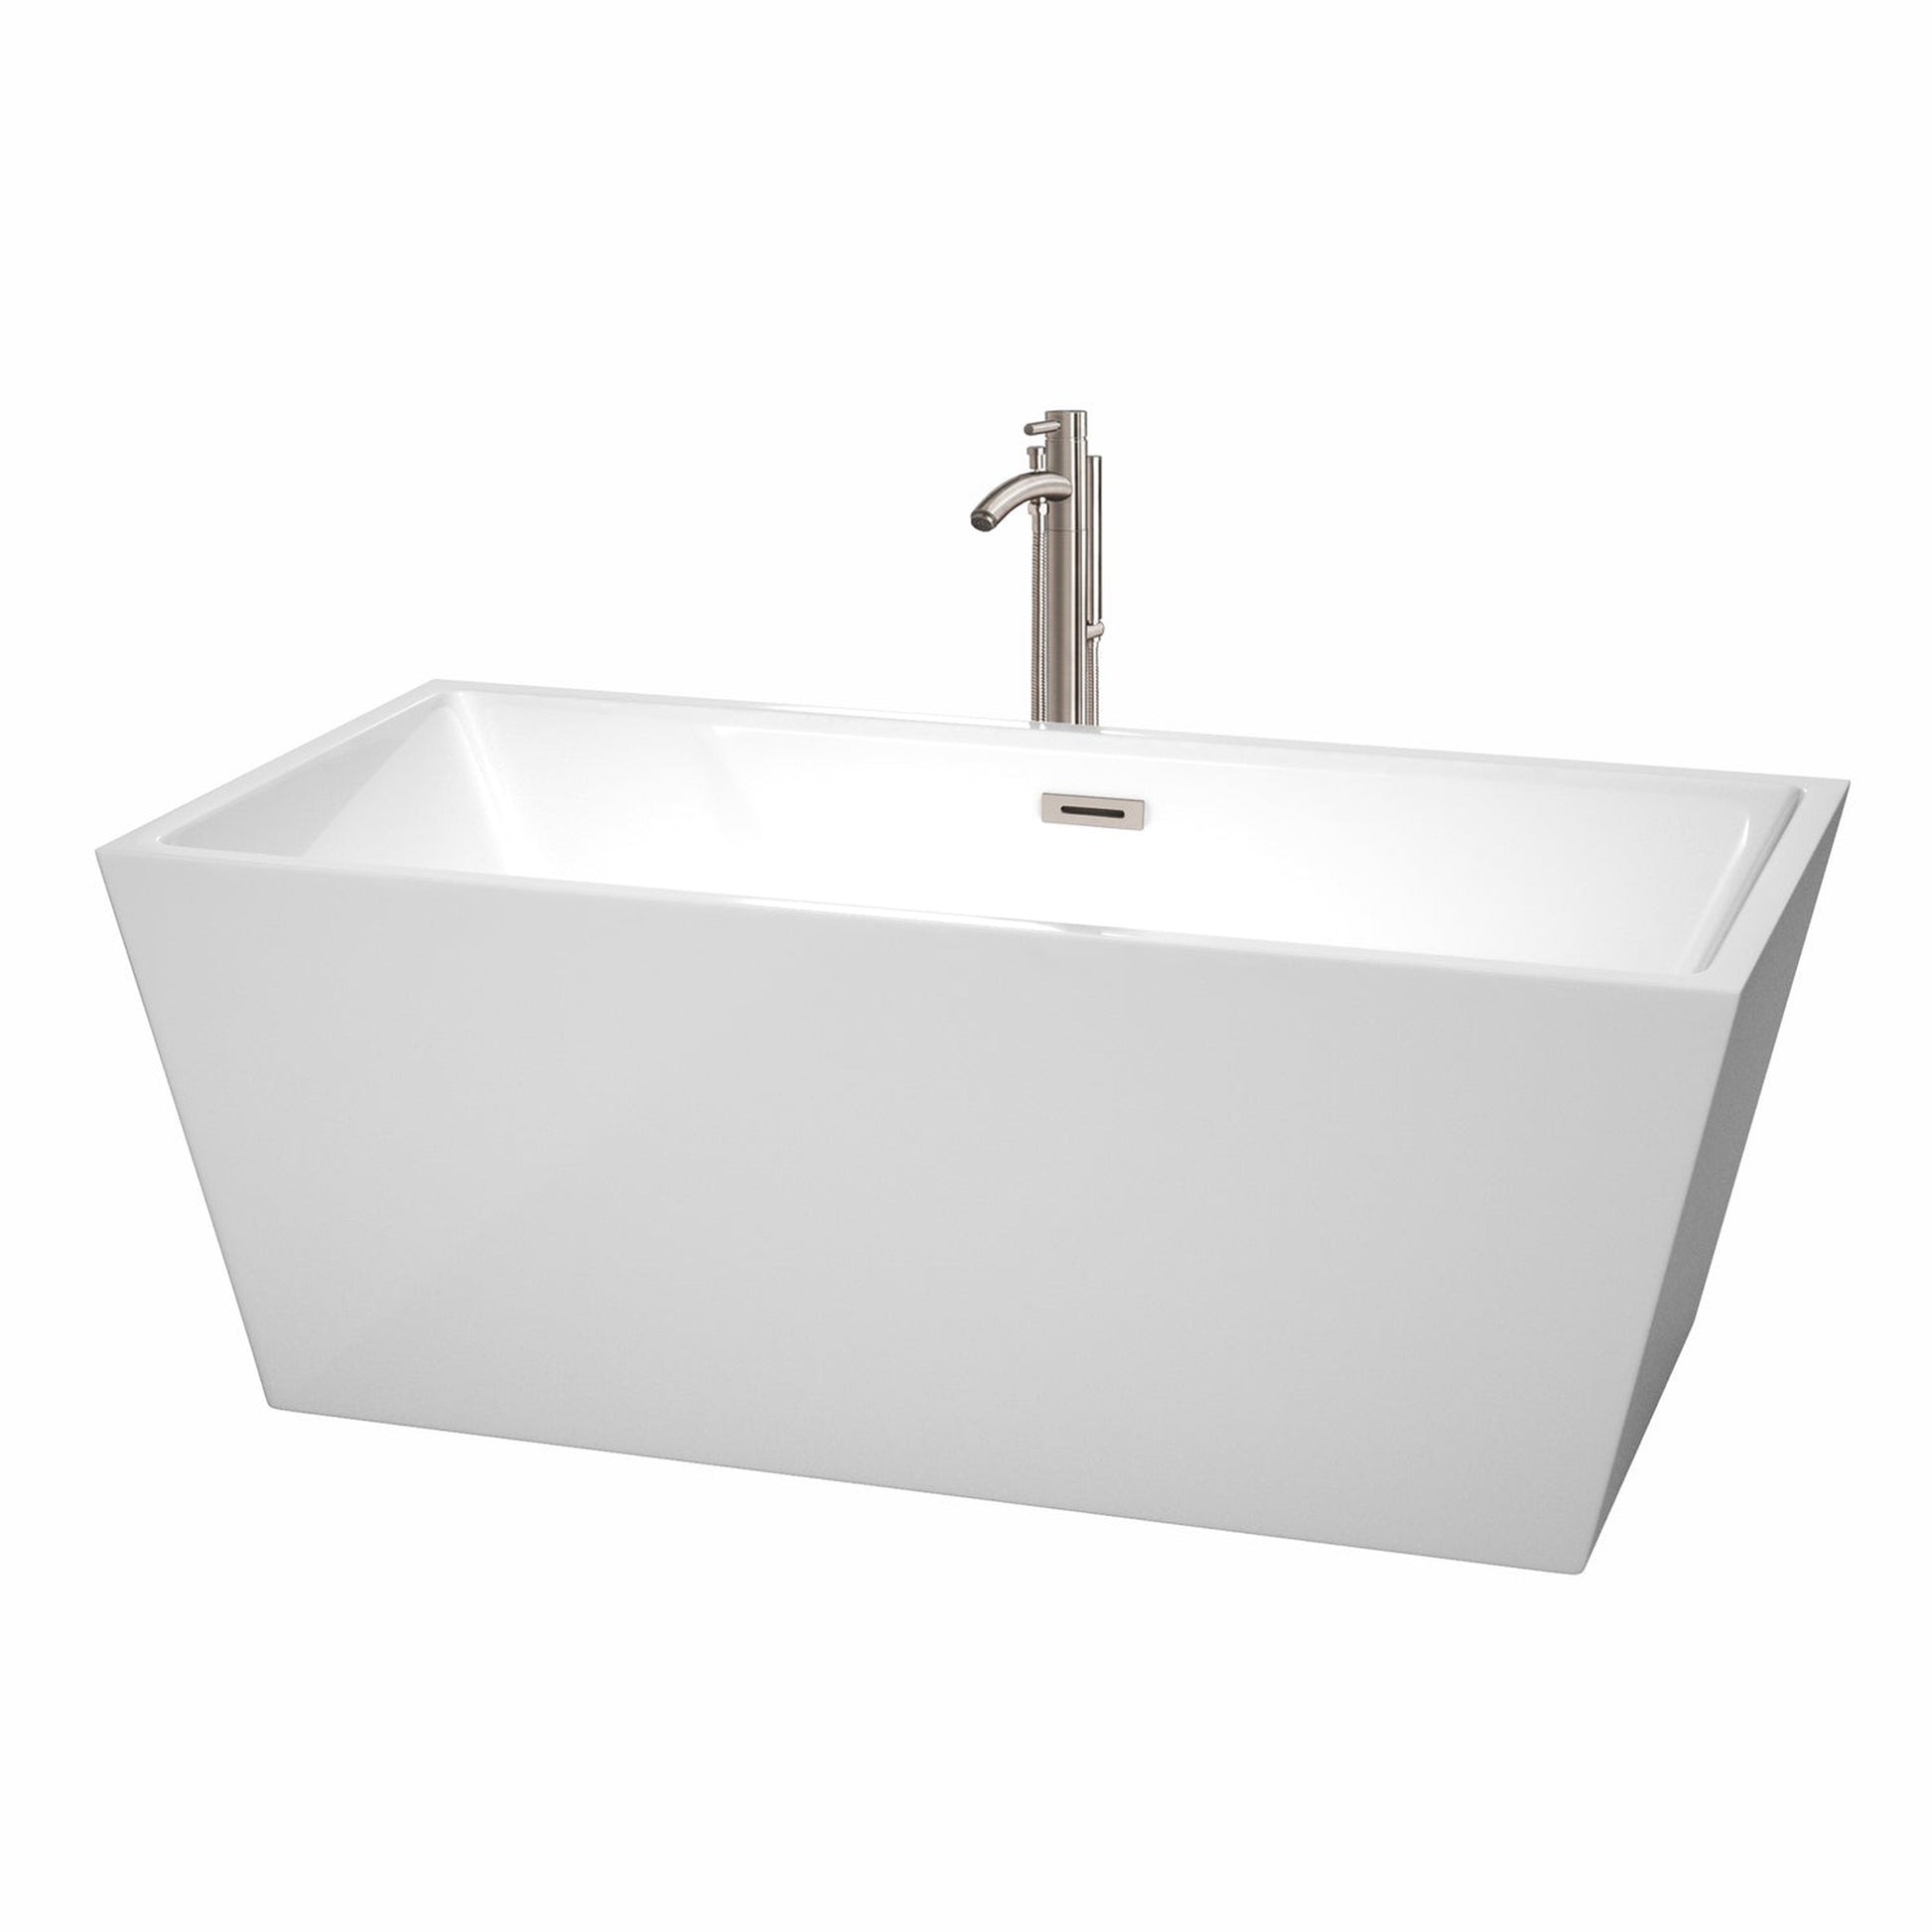 Wyndham Collection Sara 63" Freestanding Bathtub in White With Floor Mounted Faucet, Drain and Overflow Trim in Brushed Nickel